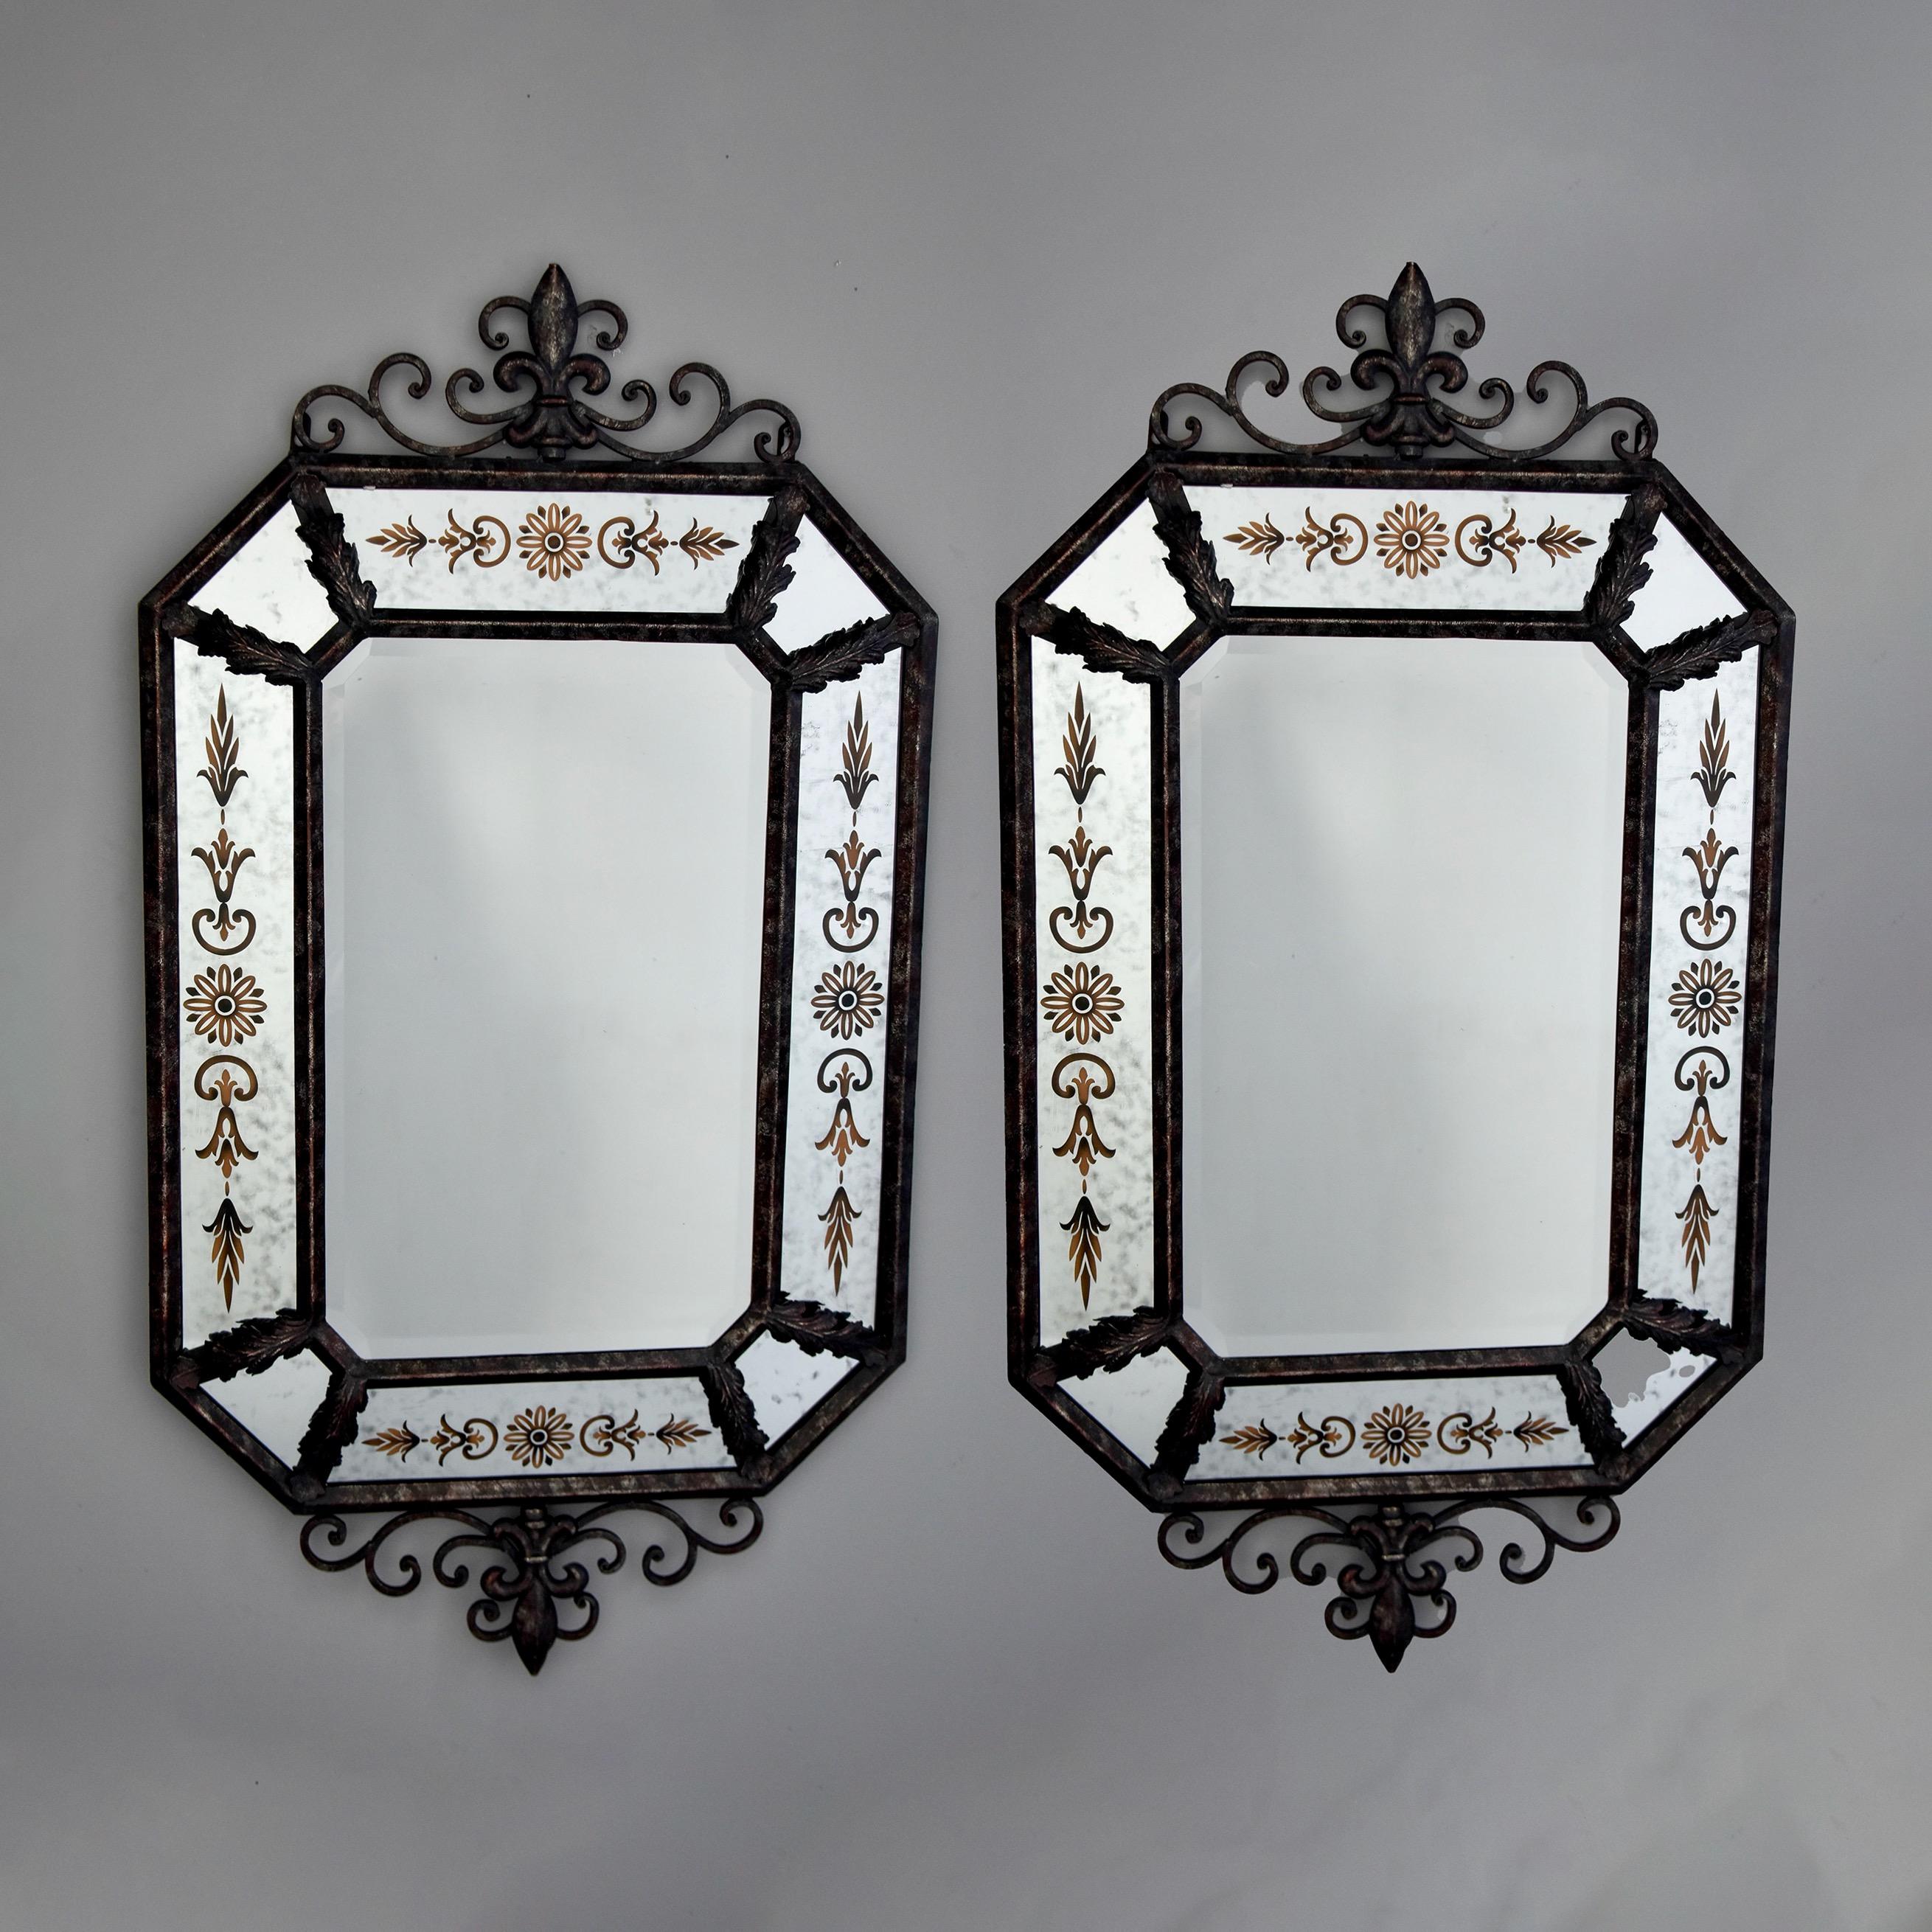 This pair of Spanish iron framed mirrors date from the 1990s. Dark iron and metal framed mirrors feature scrolled, decorative crests and finials along with acanthus leaf decorations. Outer frame of eight mirrored and painted panels surrounds a